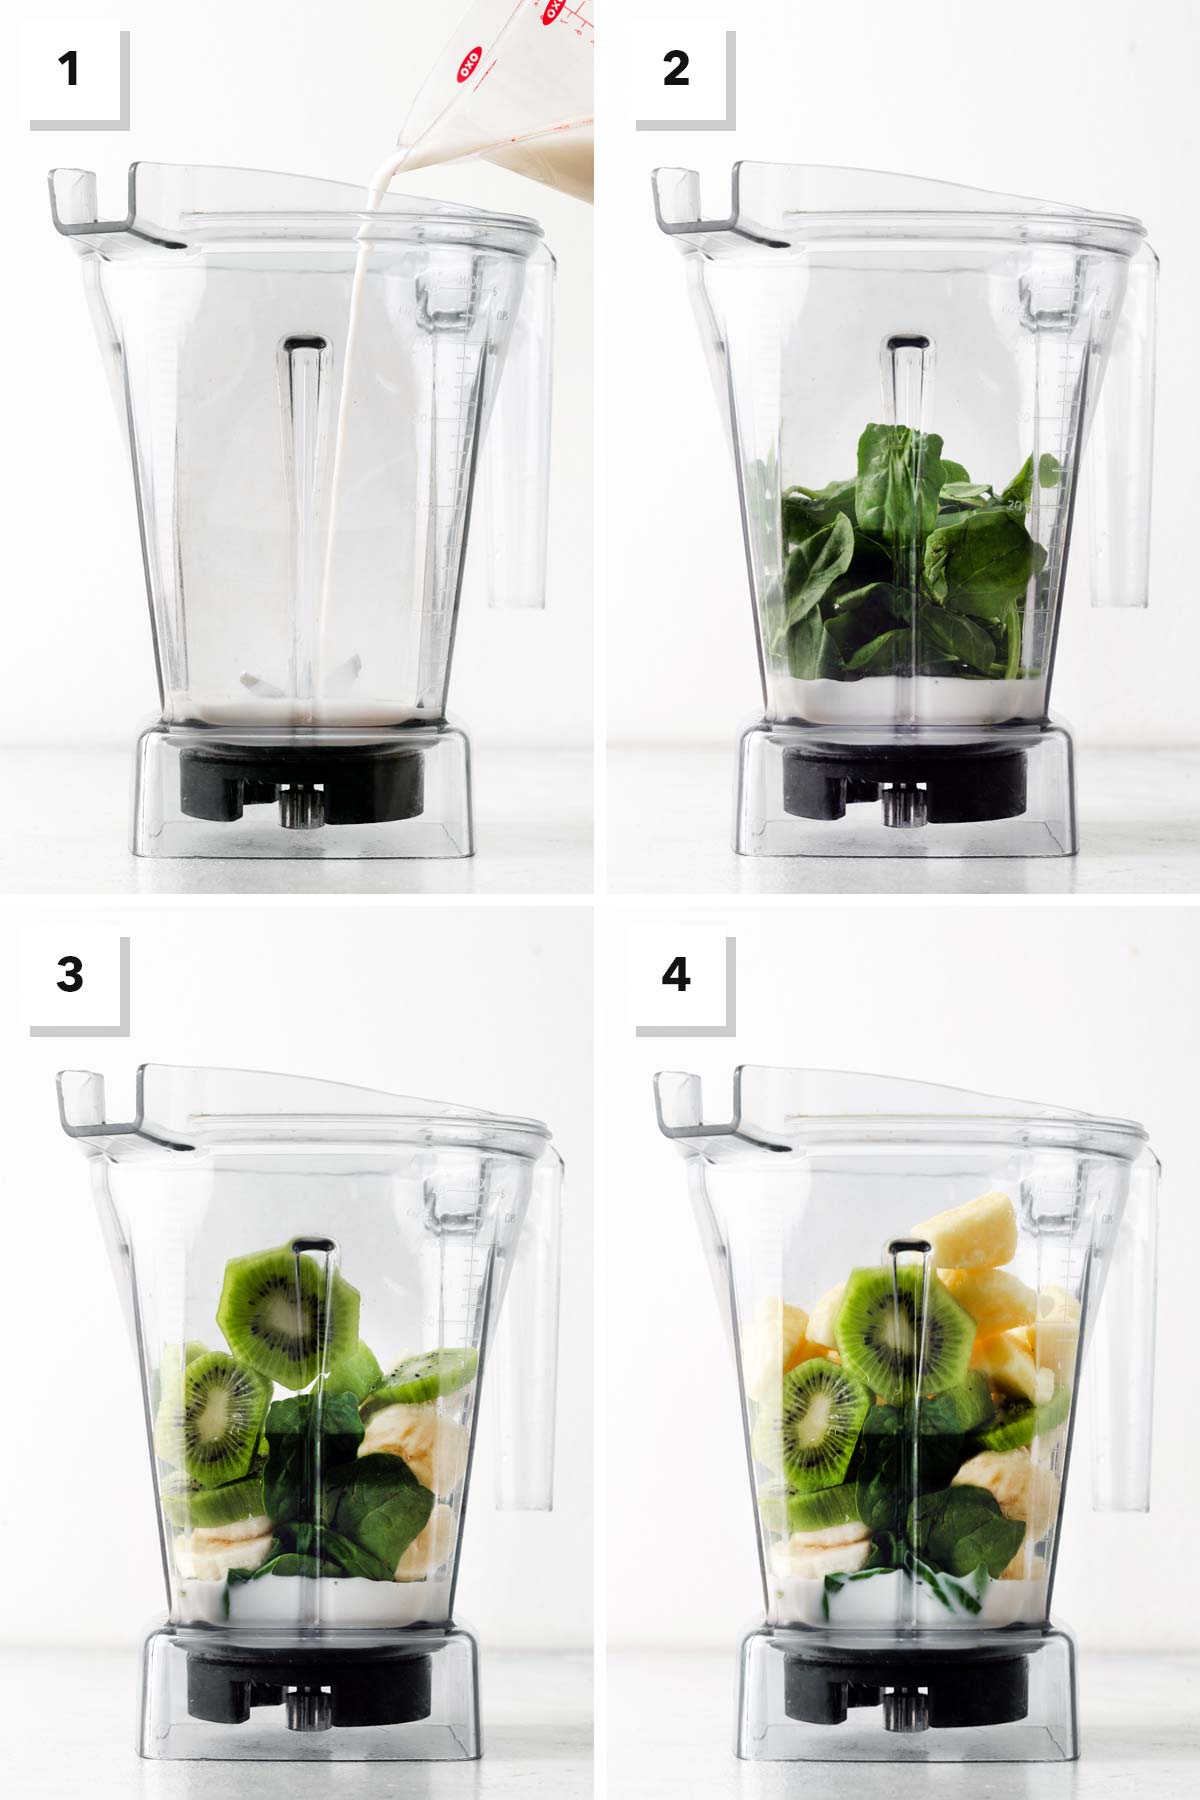 Steps for making a kiwi smoothie.